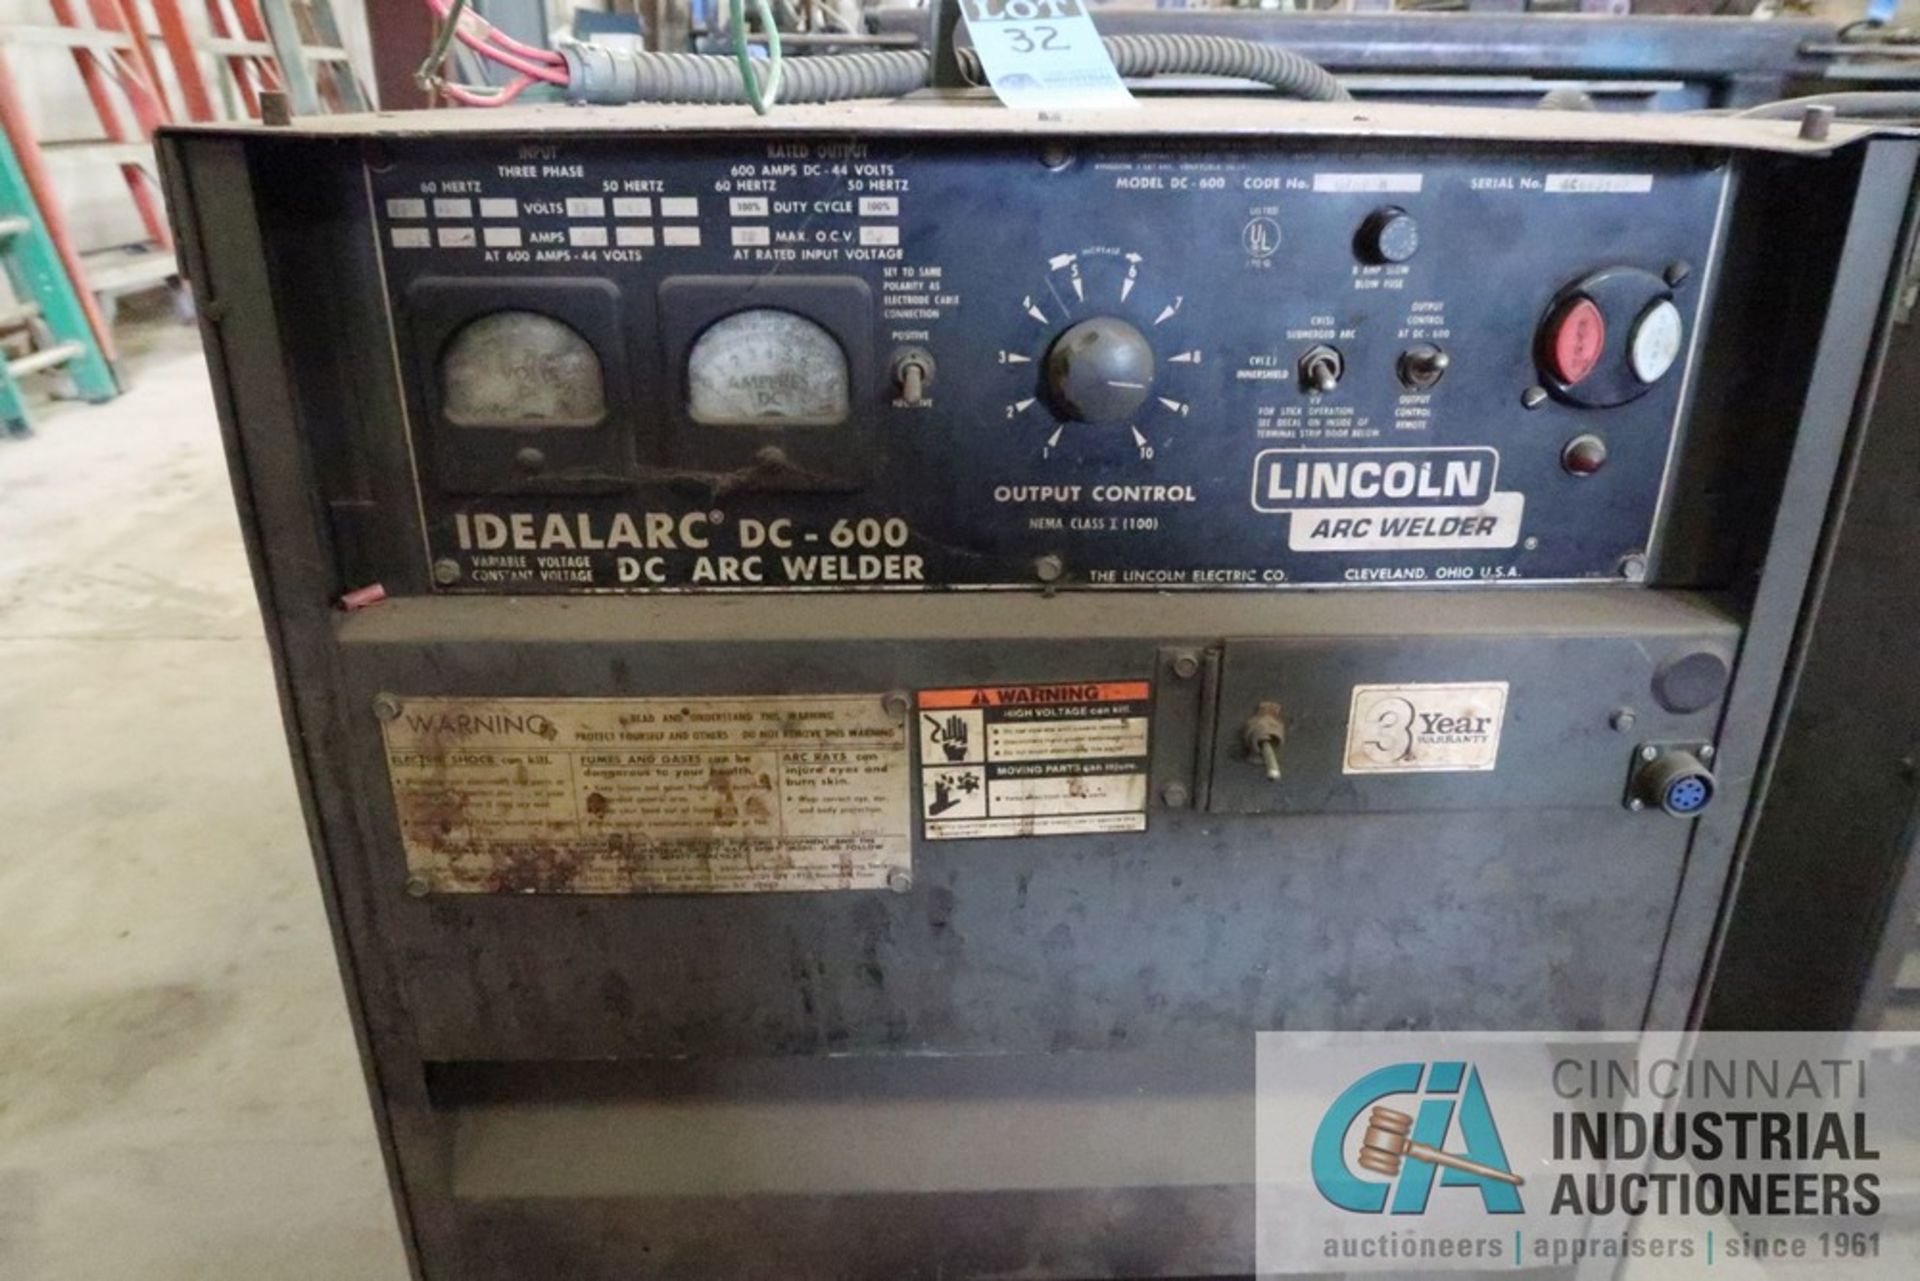 600 AMP LINCOLN ELECTRIC MODEL DC-600 ARC WELDING POWER SOURCE - Image 4 of 7